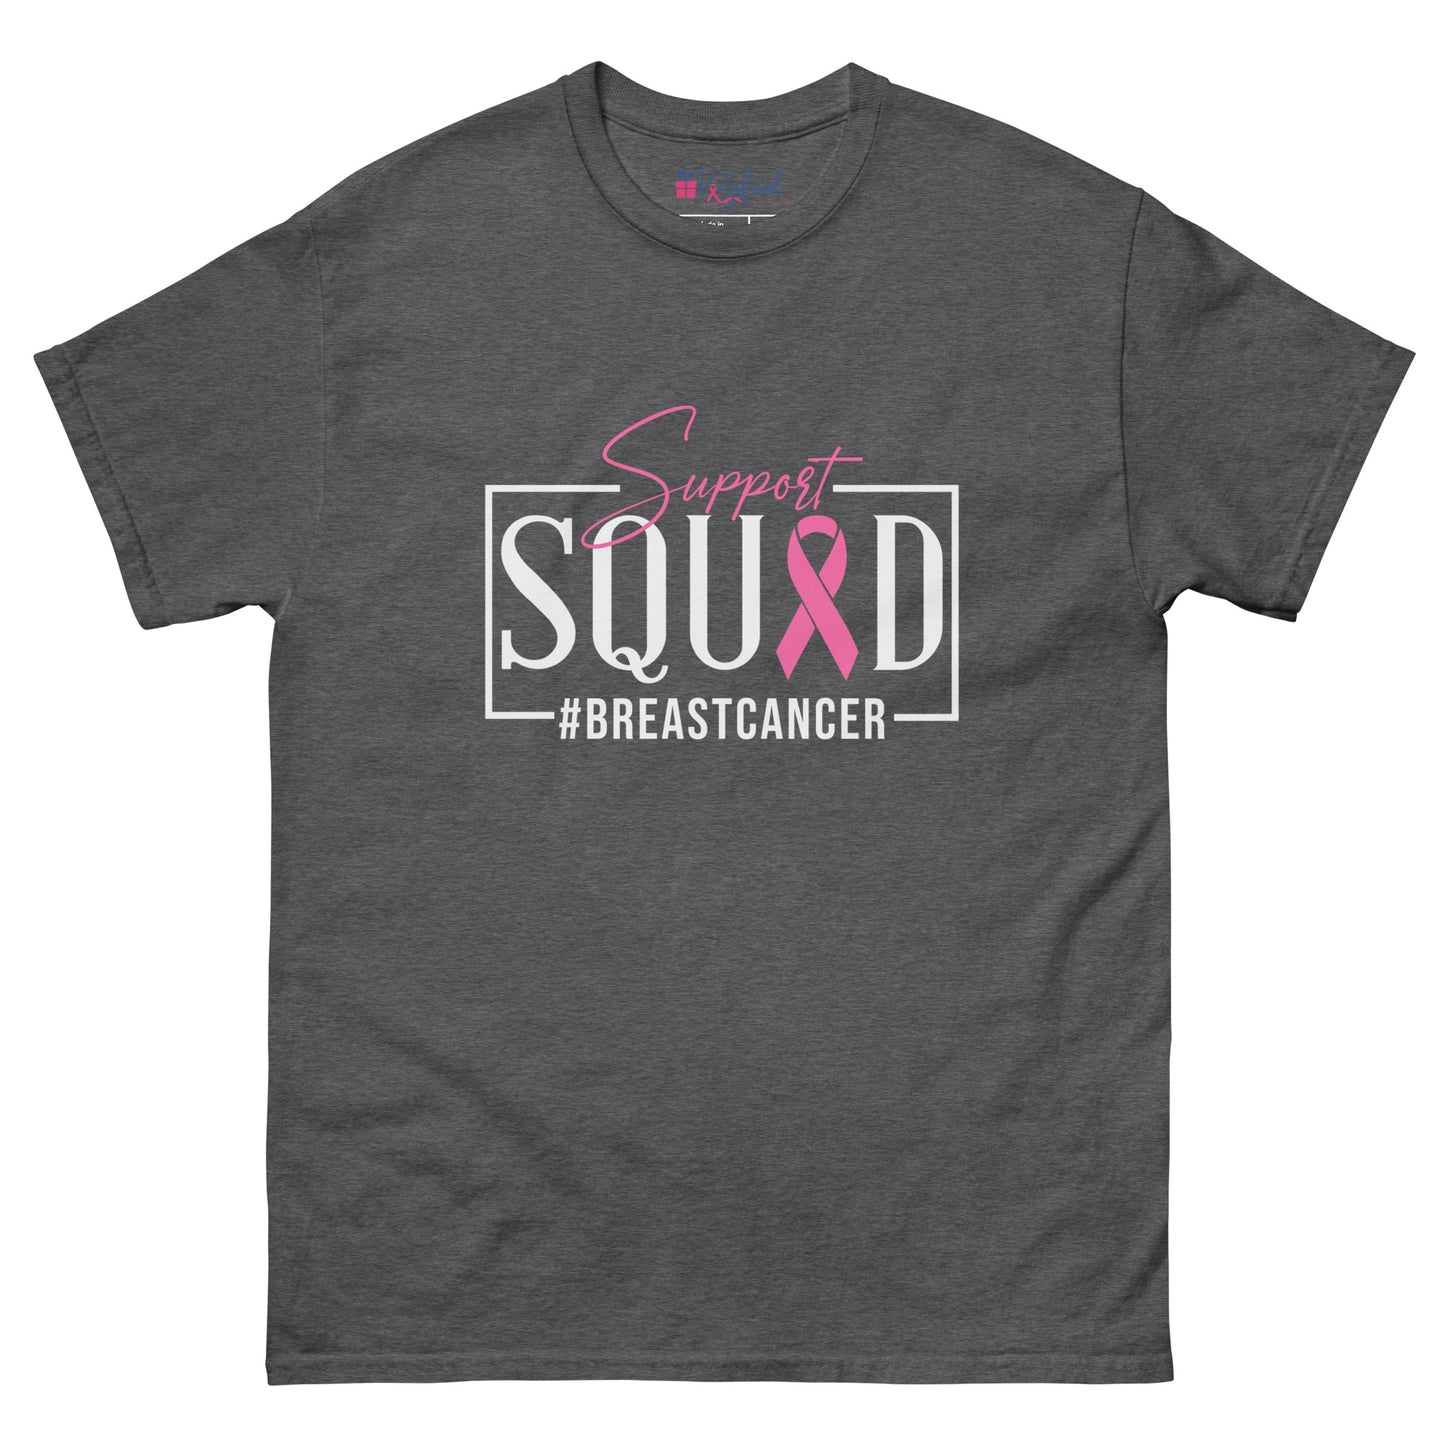 Breast Cancer Support Squad T-Shirt